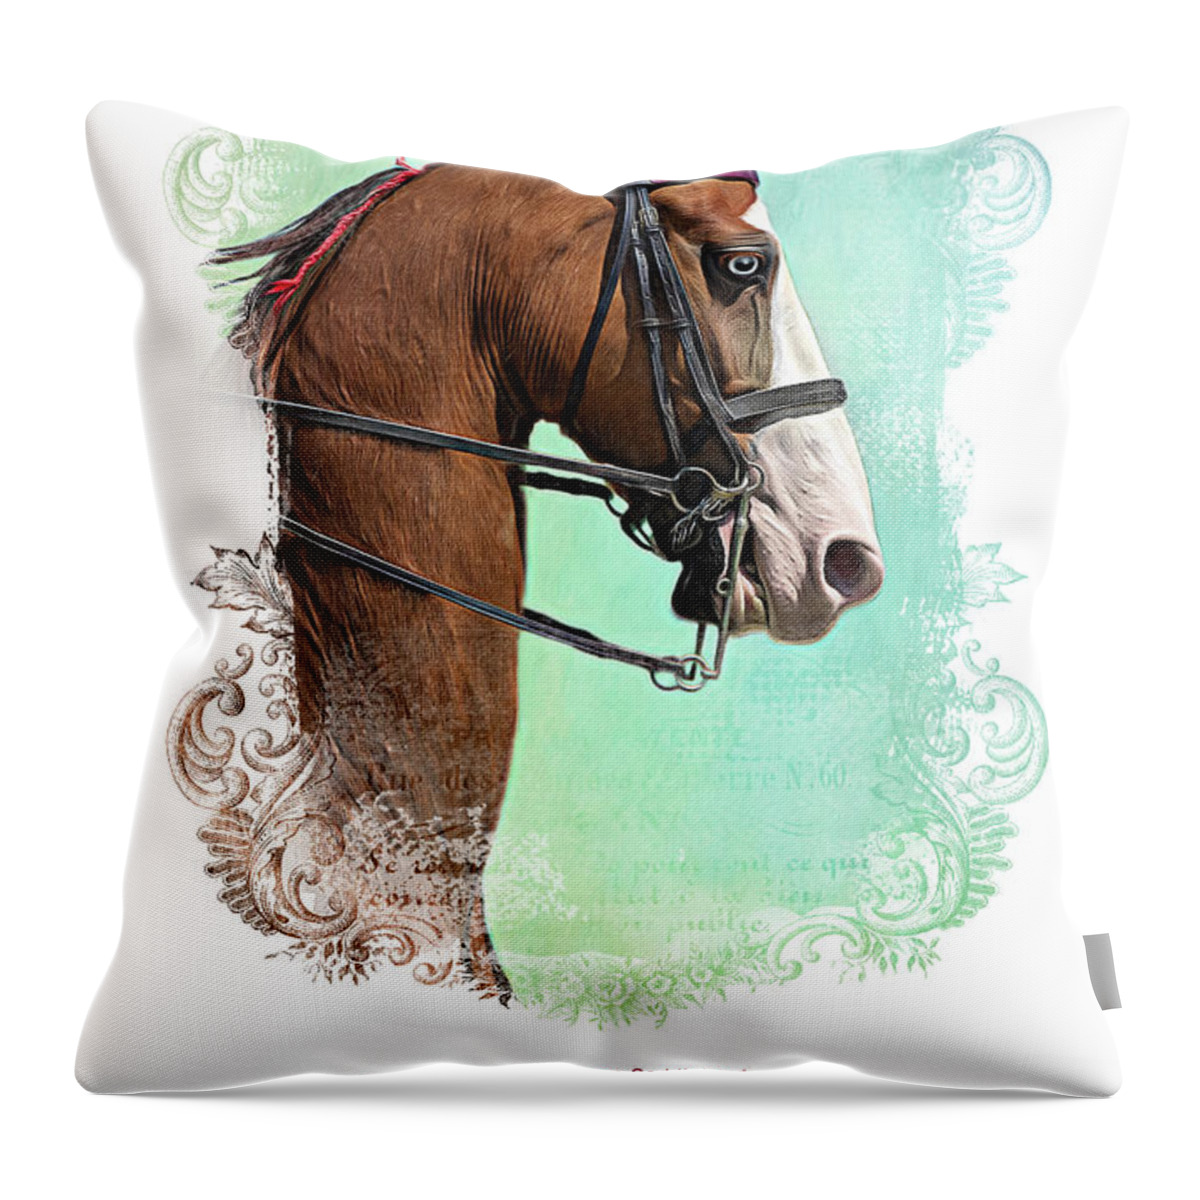 Blowing Rock Throw Pillow featuring the digital art Exquisite Beauty by Amy Dundon